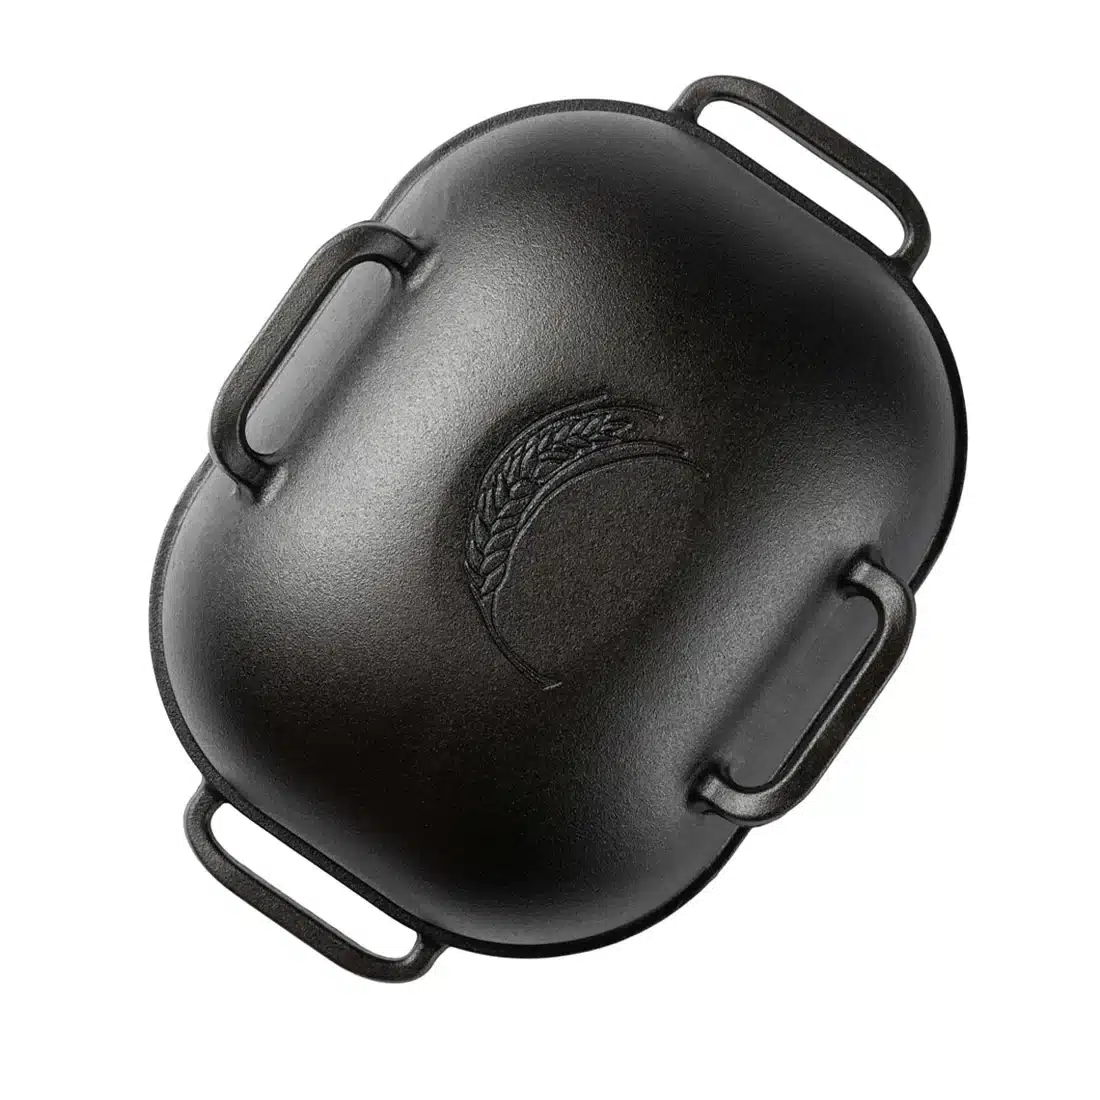 The Challenger Bread Pan Review